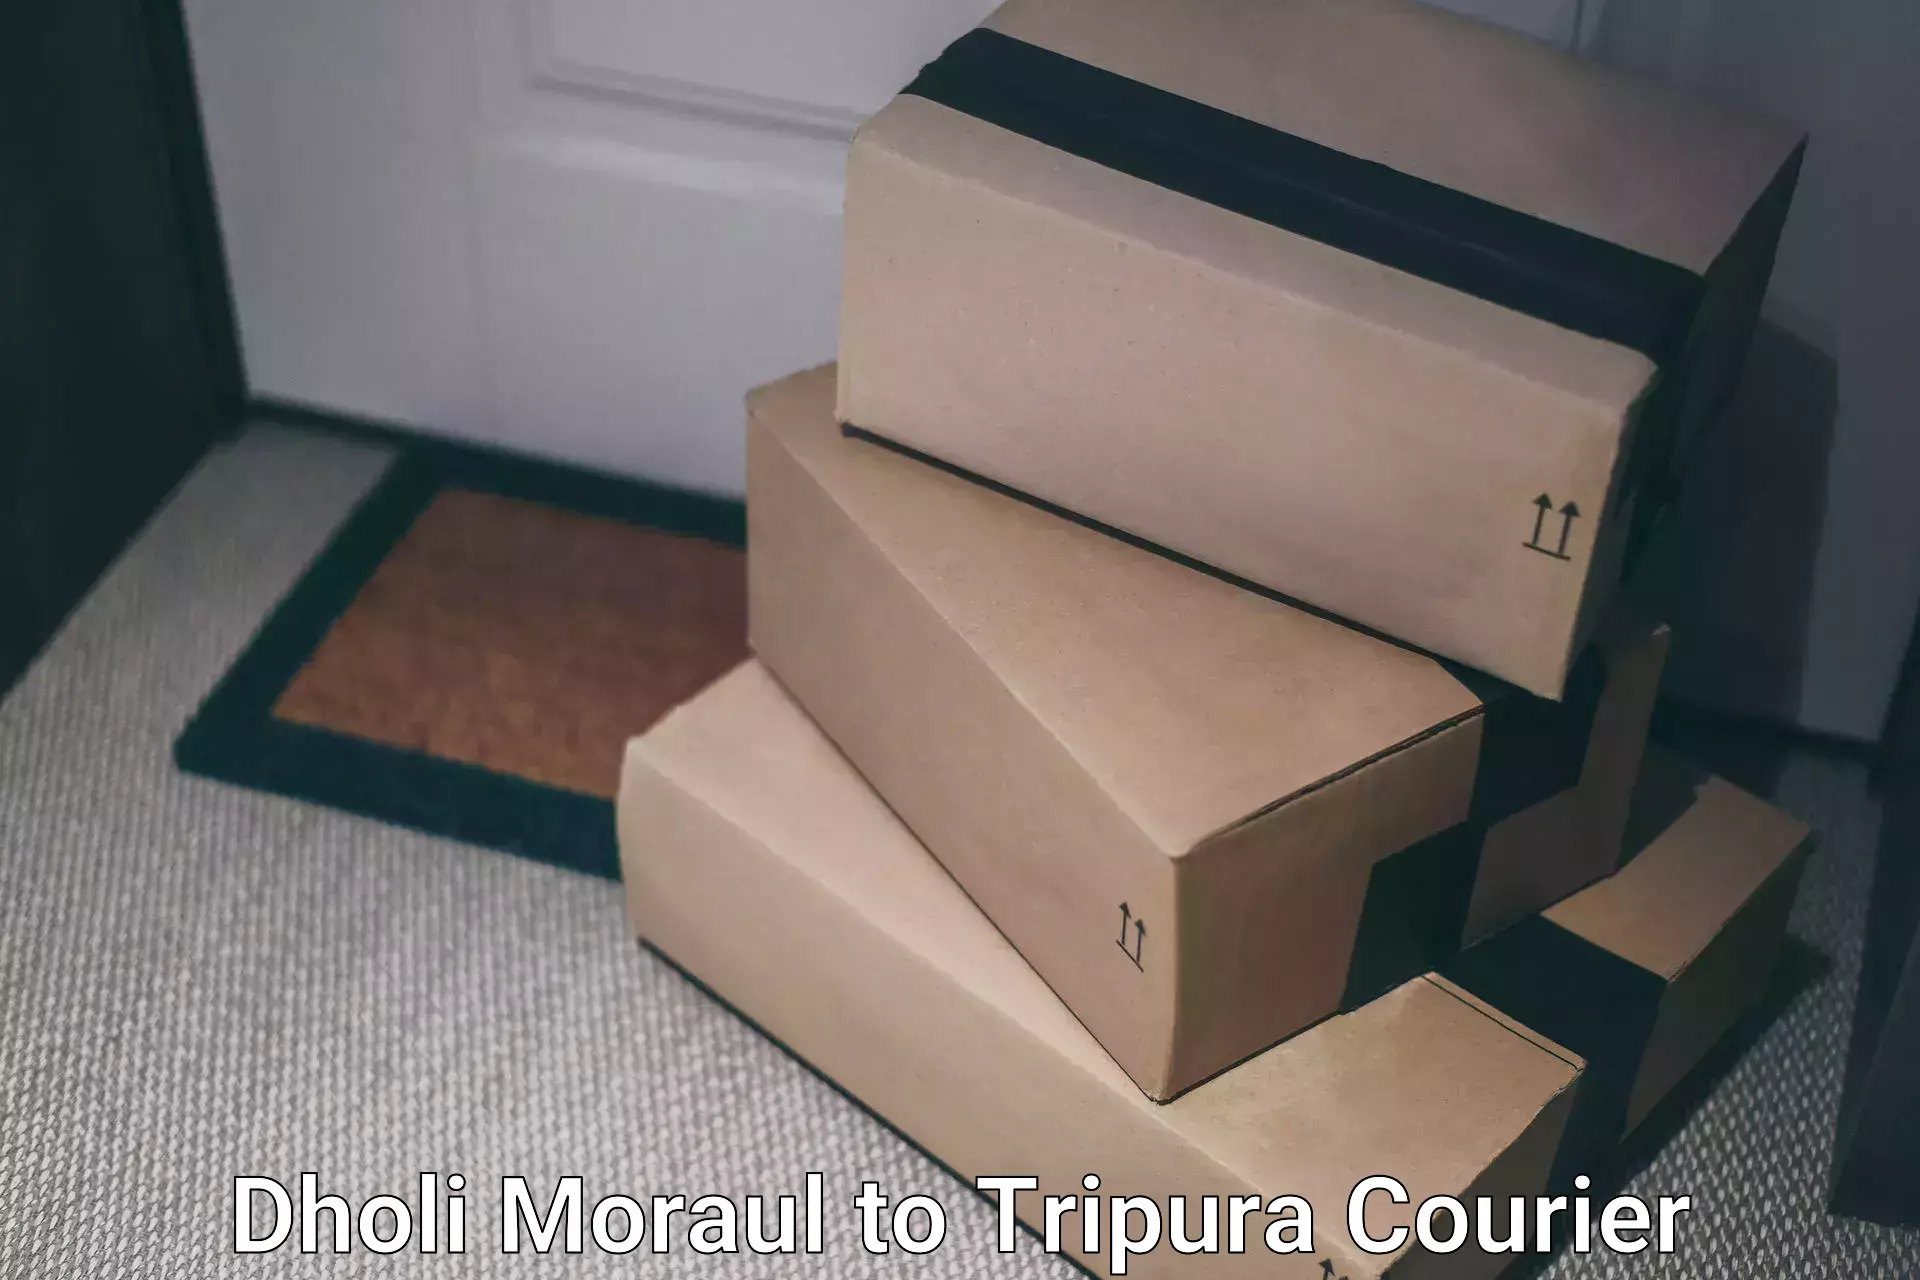 Reliable courier service Dholi Moraul to Udaipur Tripura